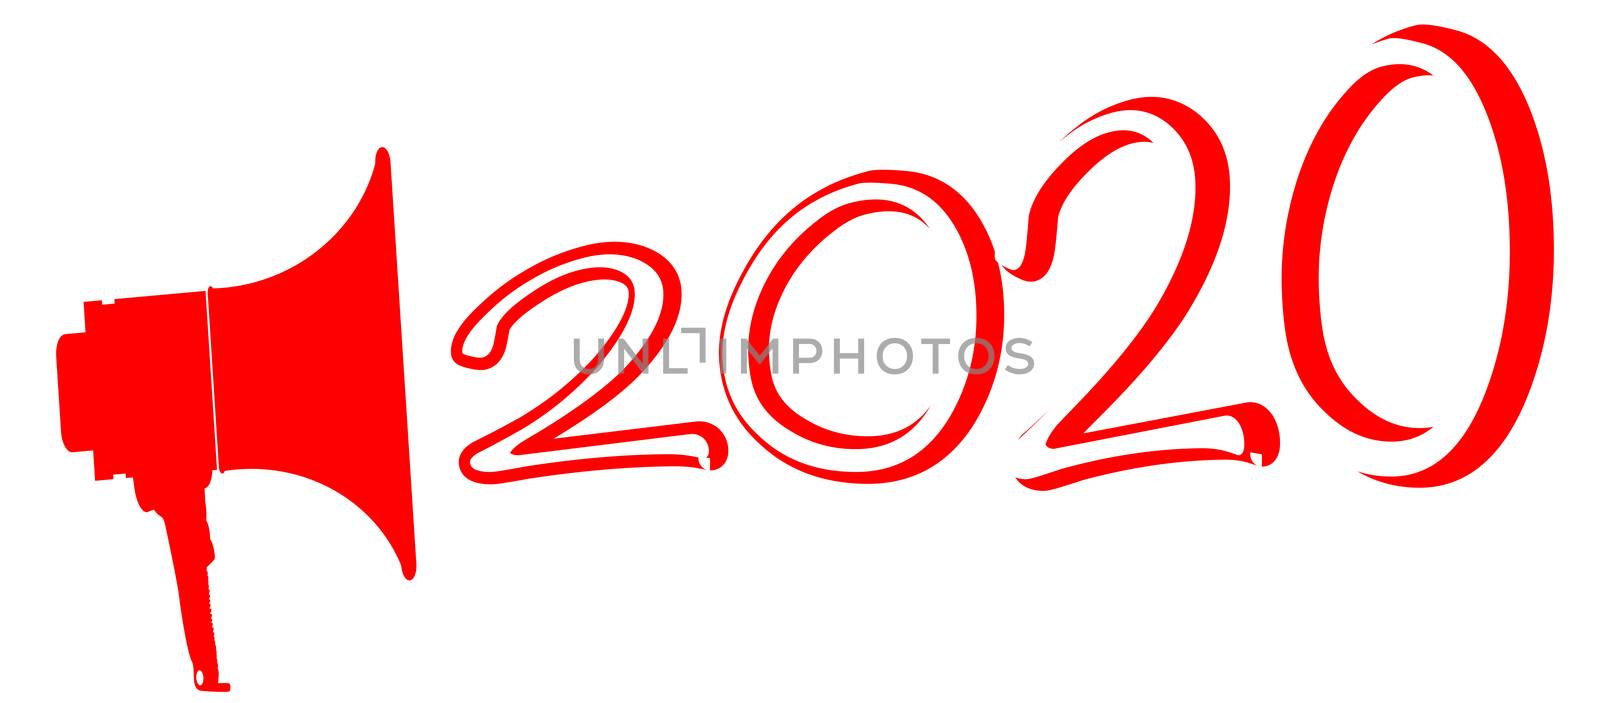 A red 2020 megaphone isolated over a white background